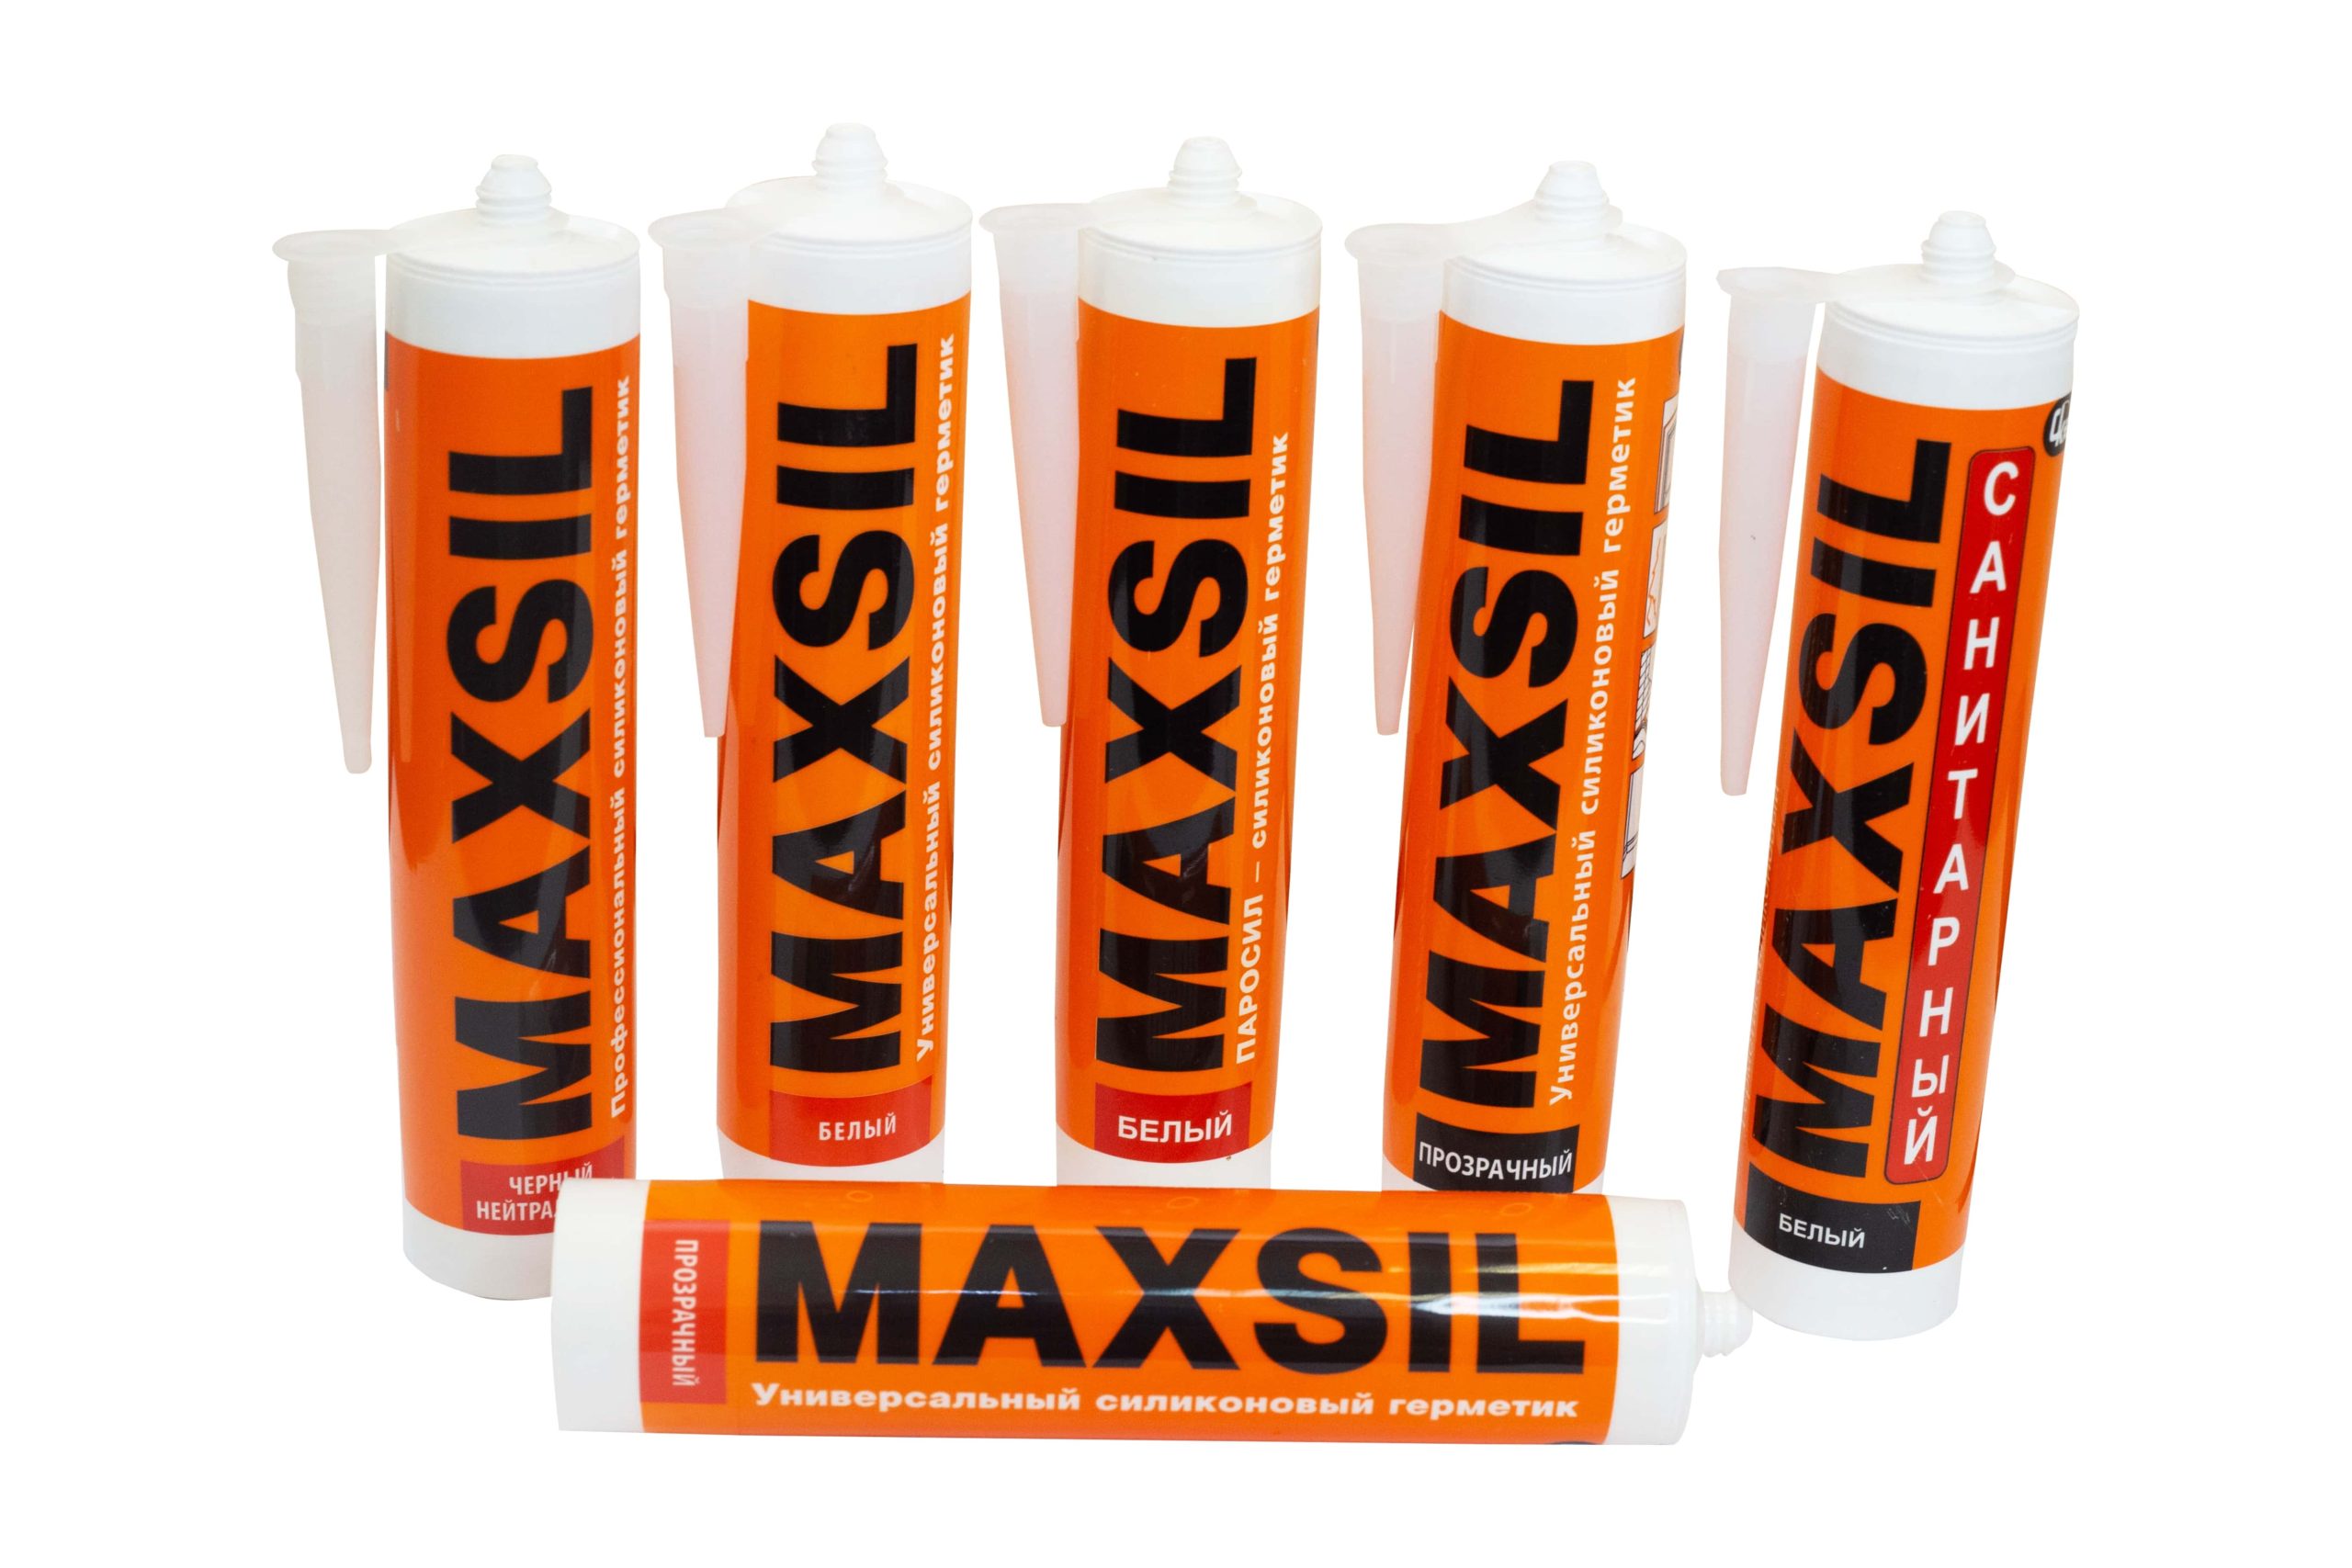 MAXSIL SN universal neutral cure silicone sealants